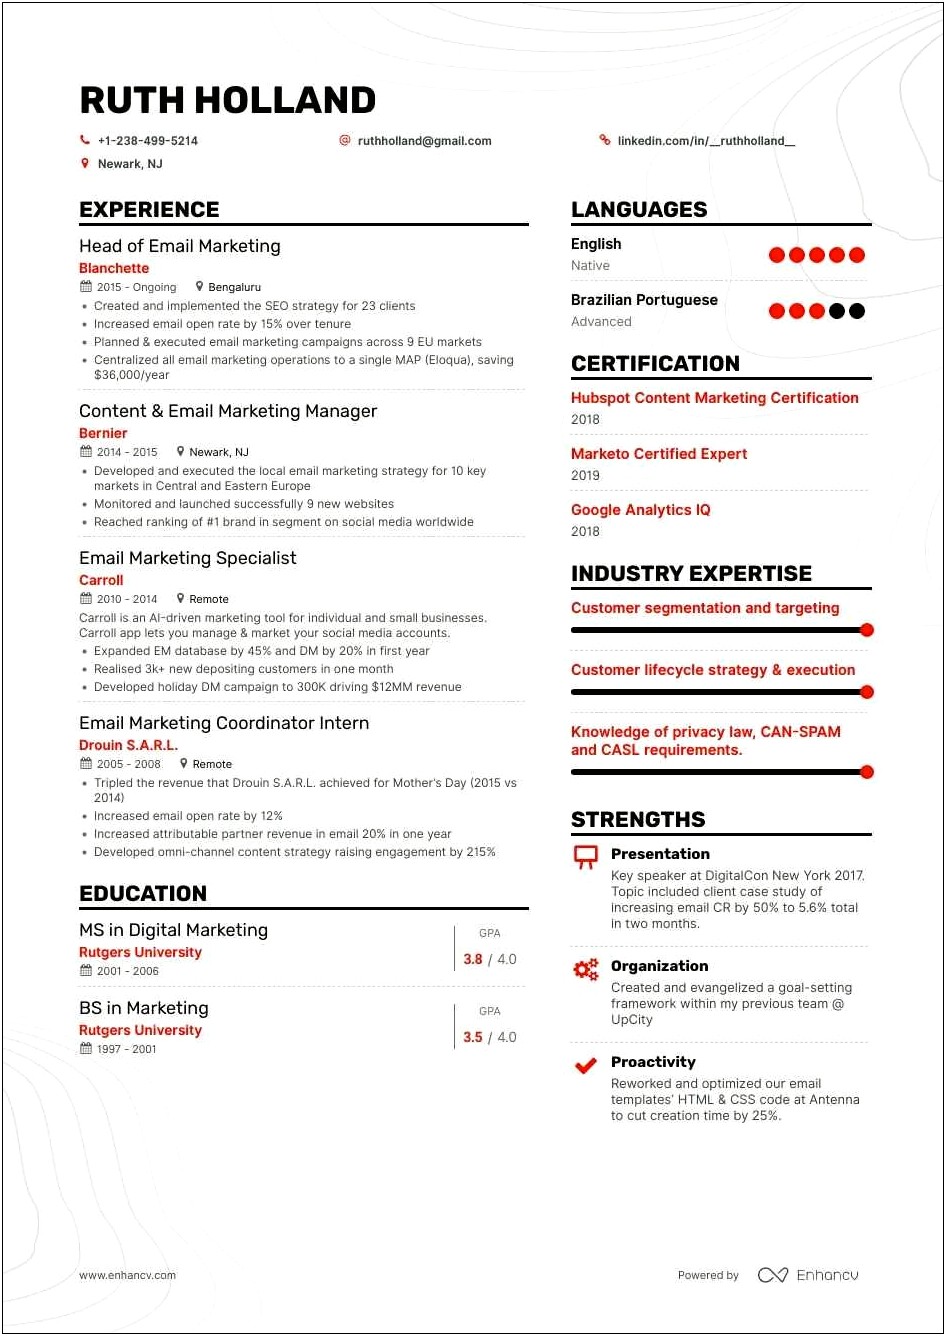 Best Email Services To Use For A Resume